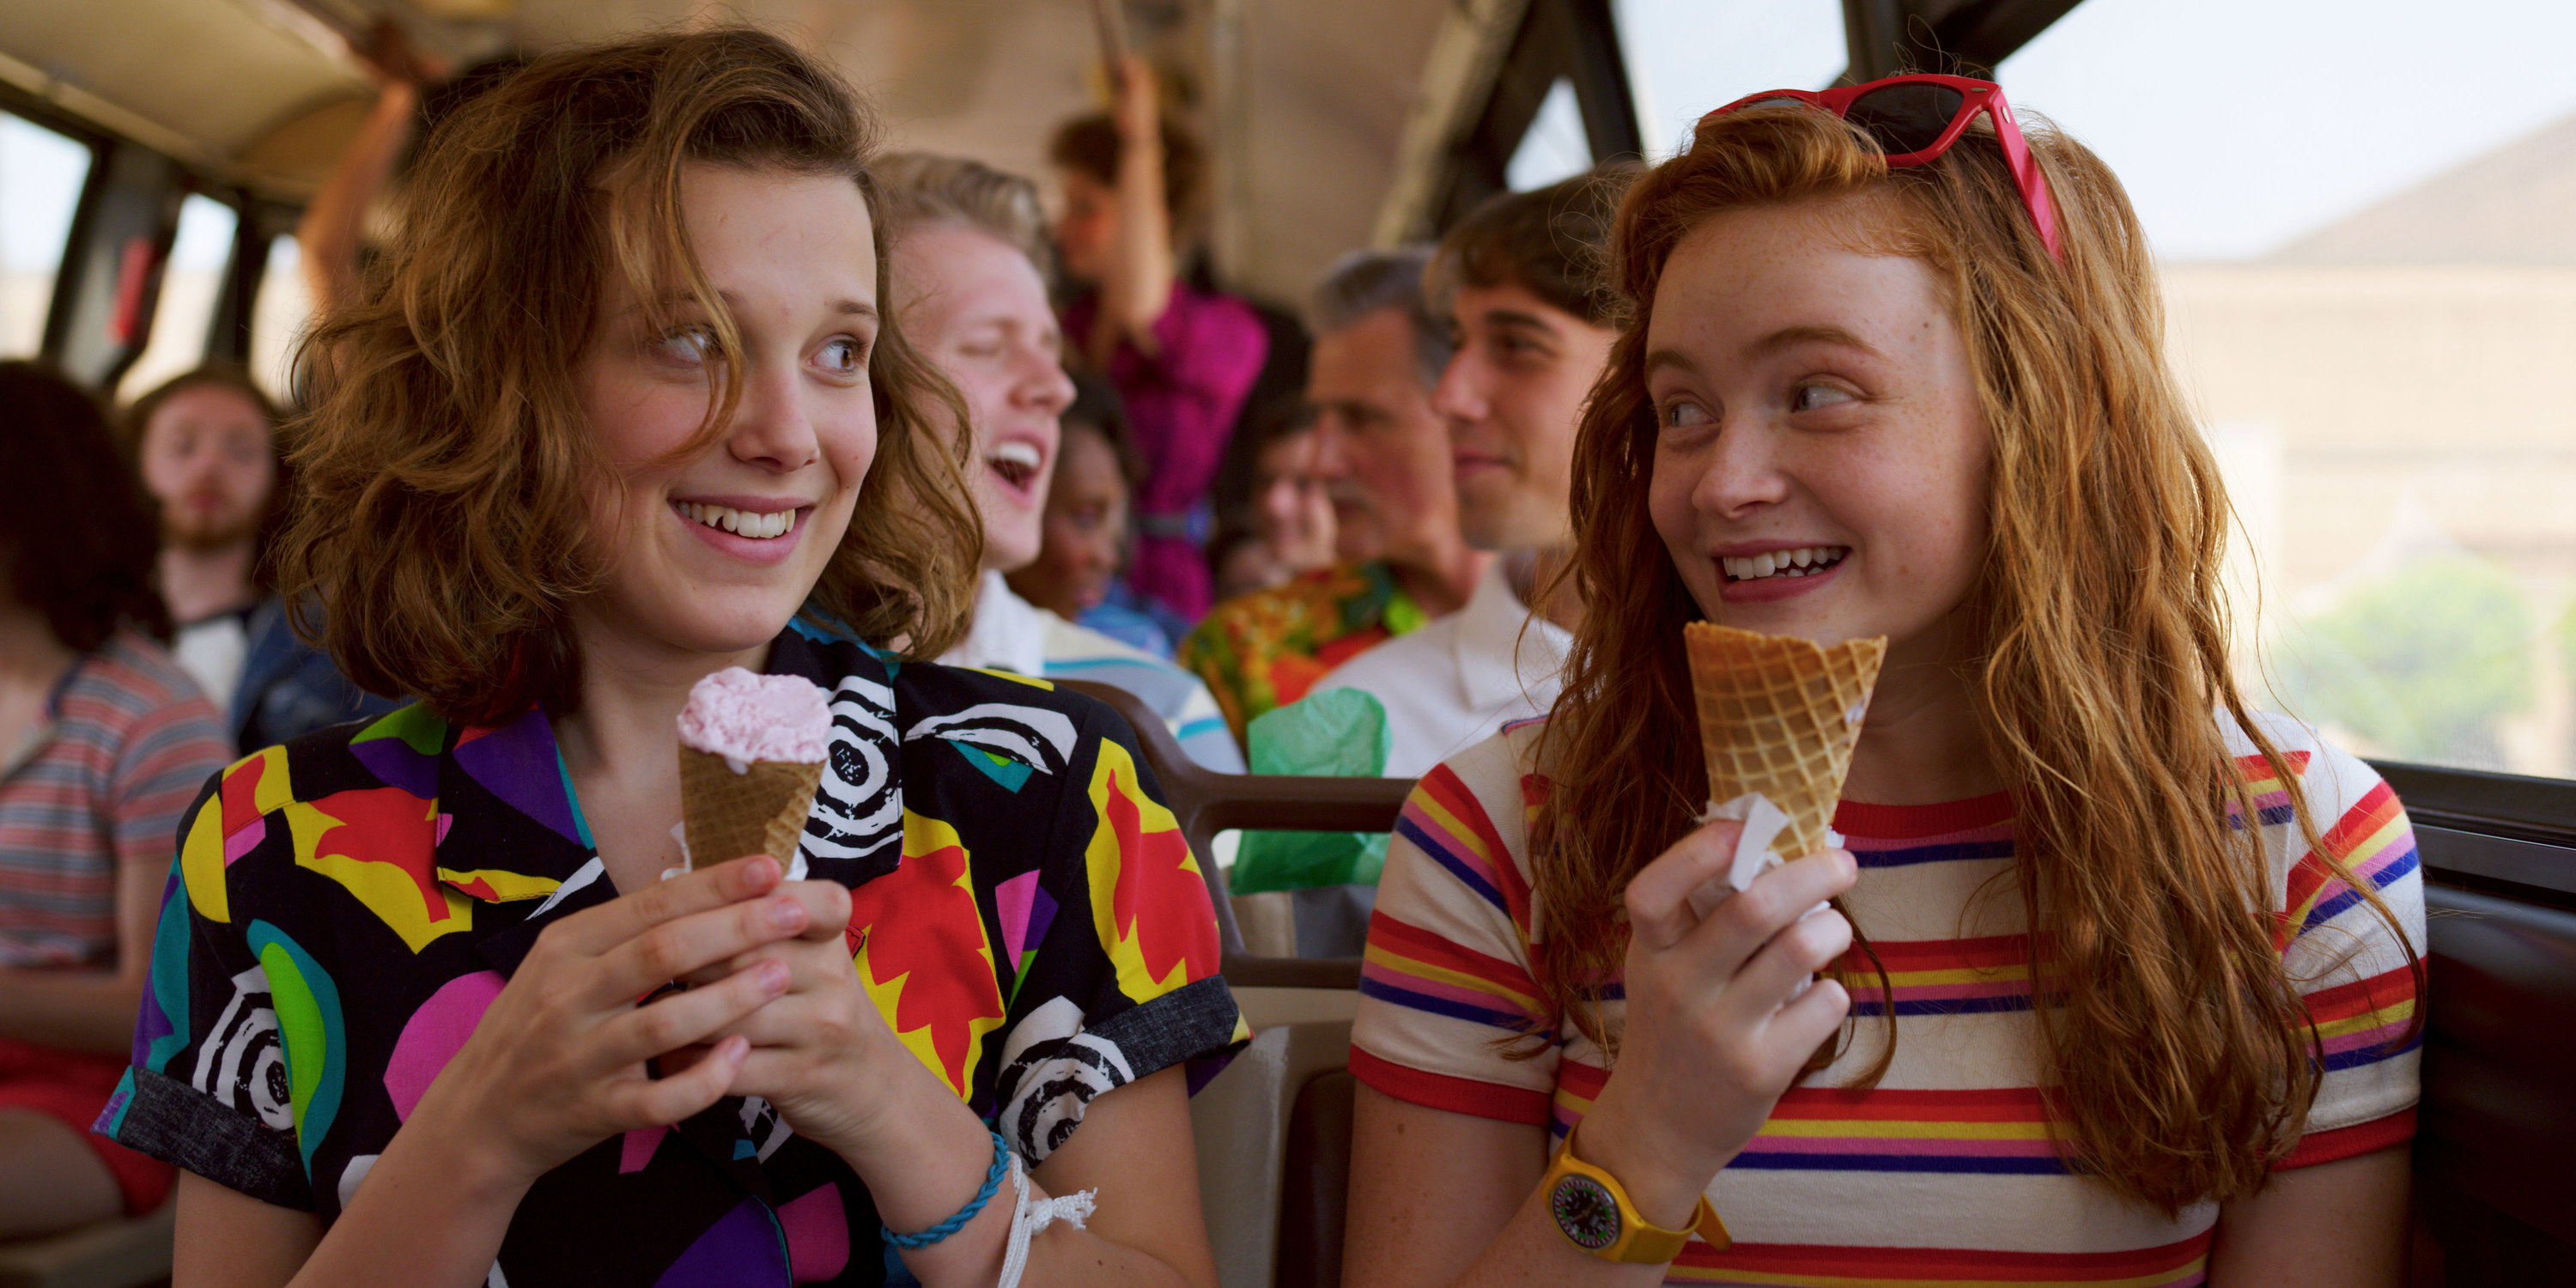 Eleven and Max eating ice cream and smiling